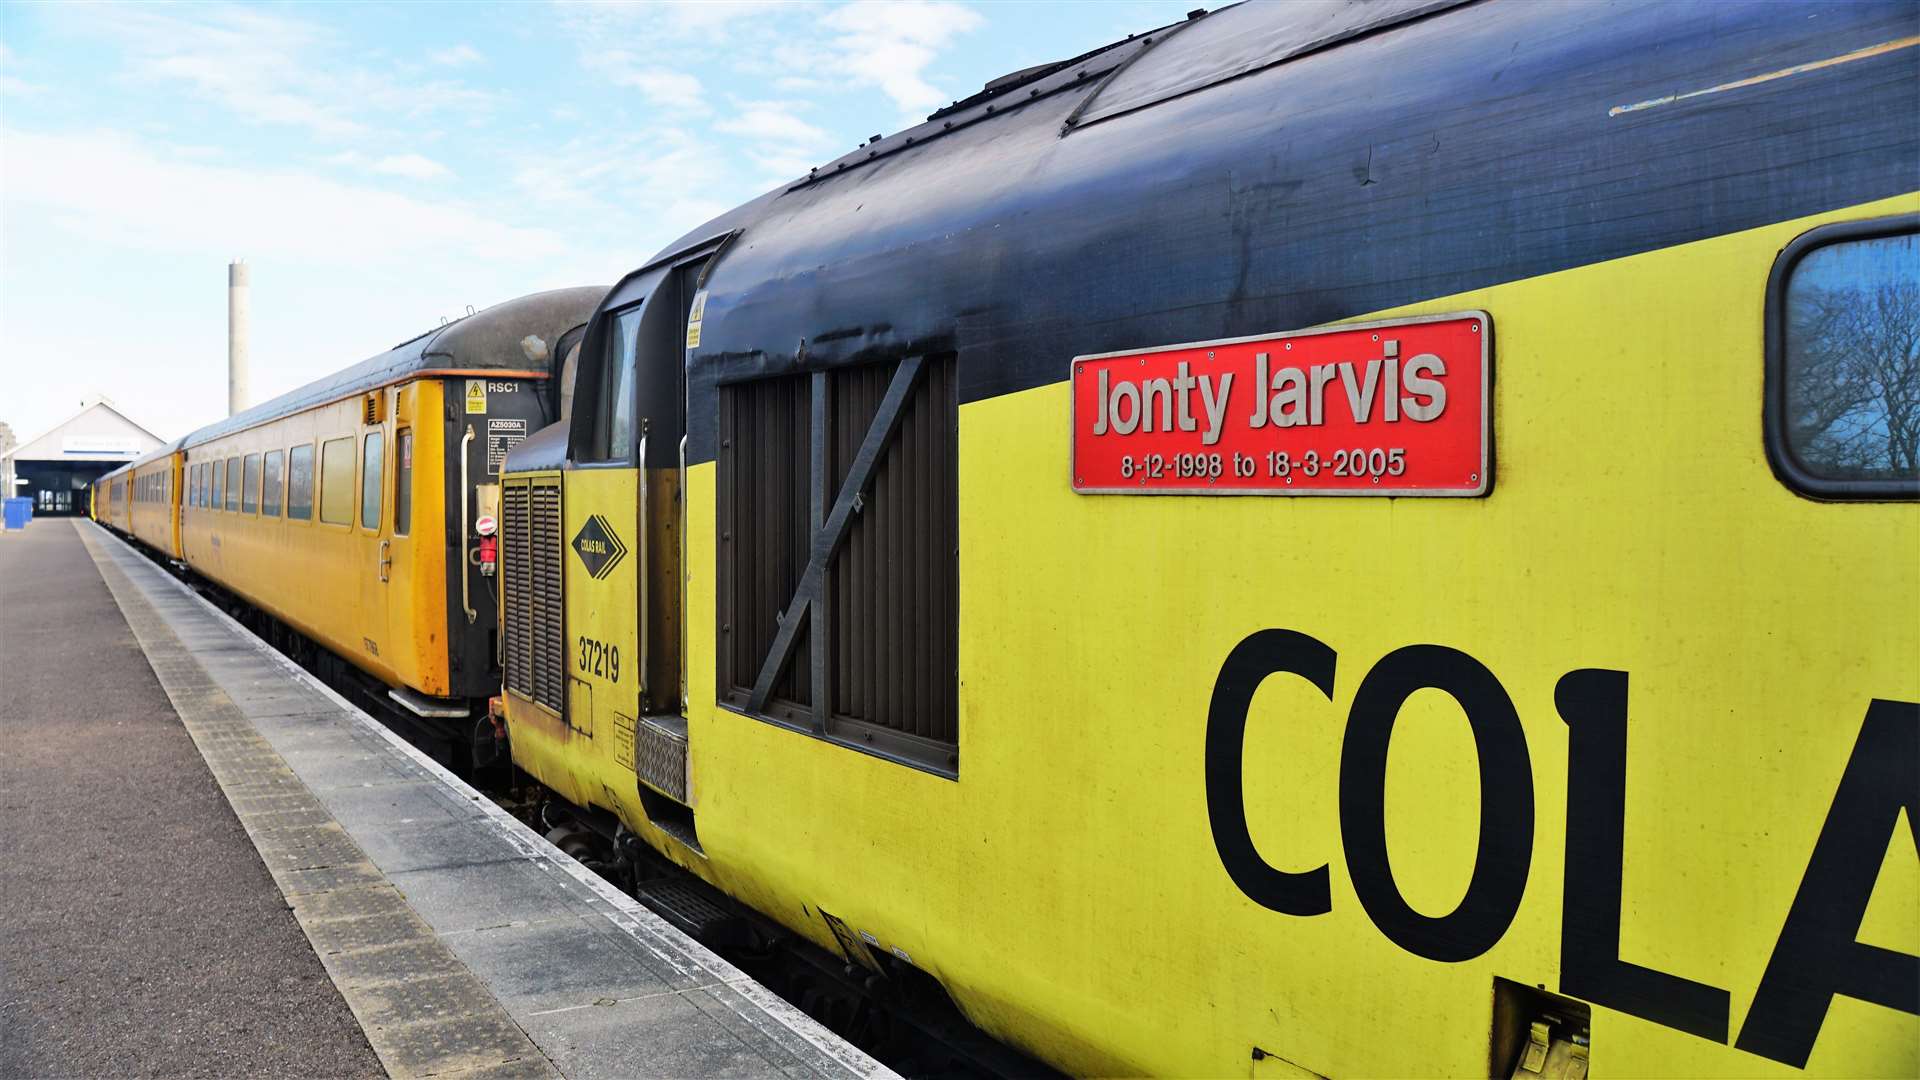 The Jonty Jarvis locomotive is named after a 6-year-old boy who died of meningitis. Picture: DGS